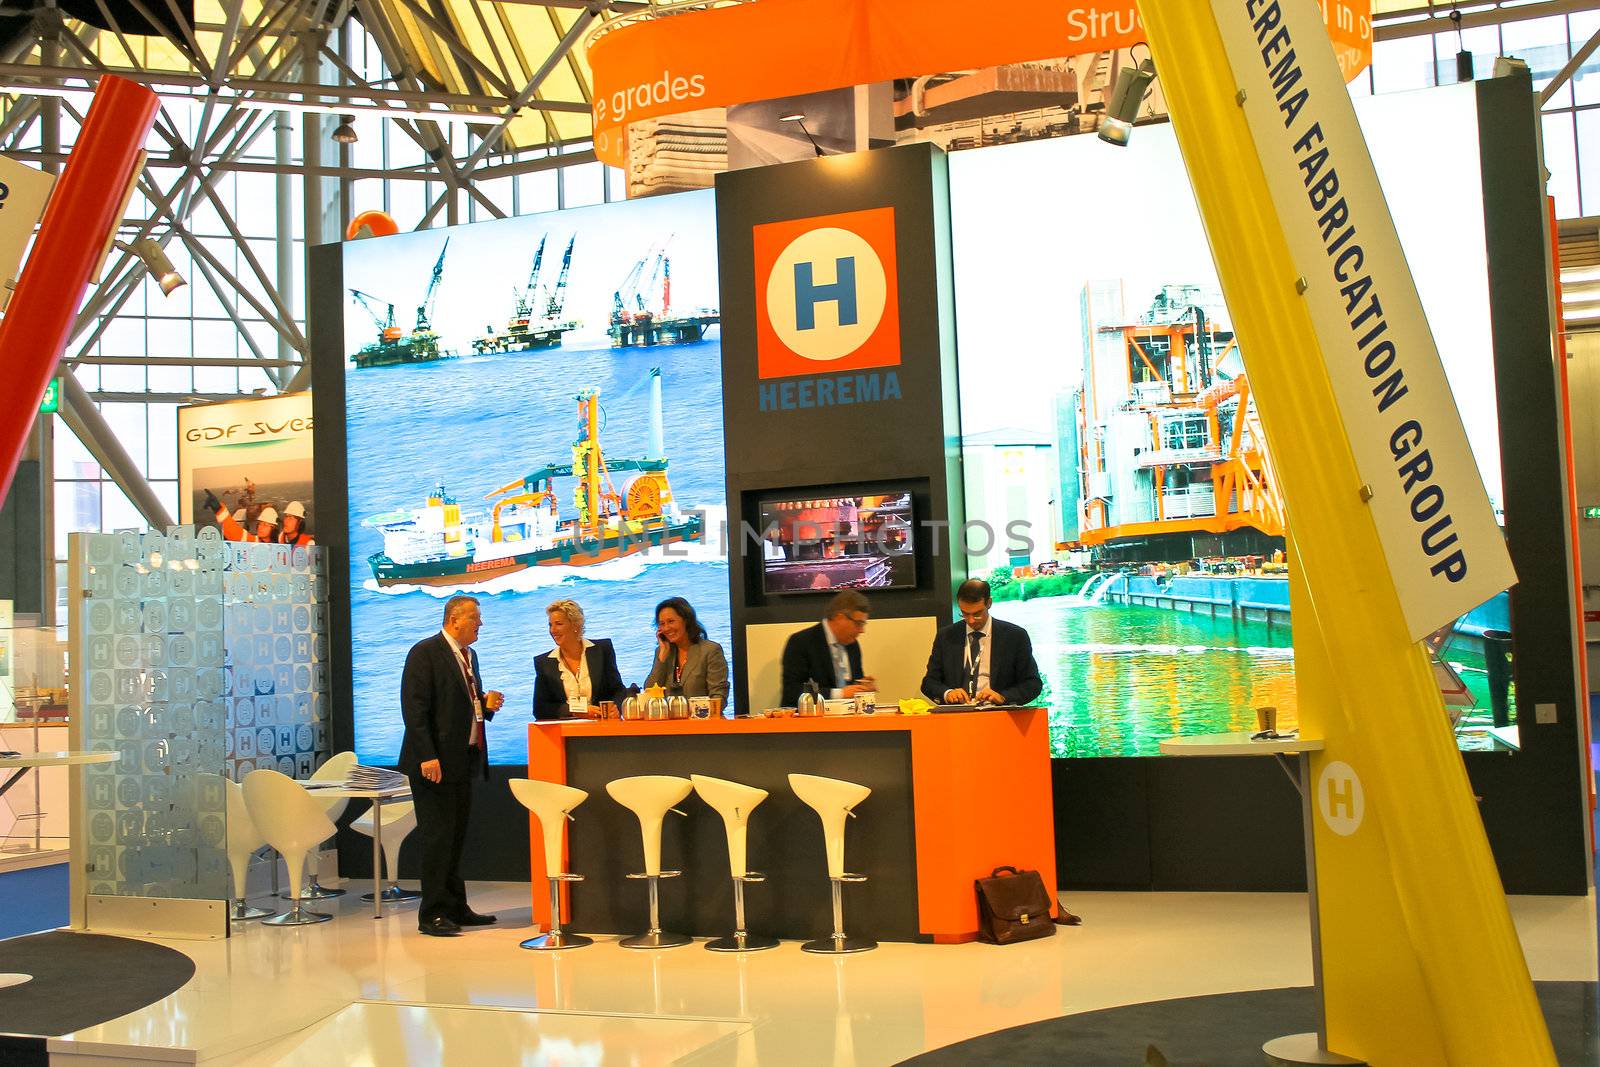 The exhibition Offshore Energy 2012. Amsterdam. Netherlands